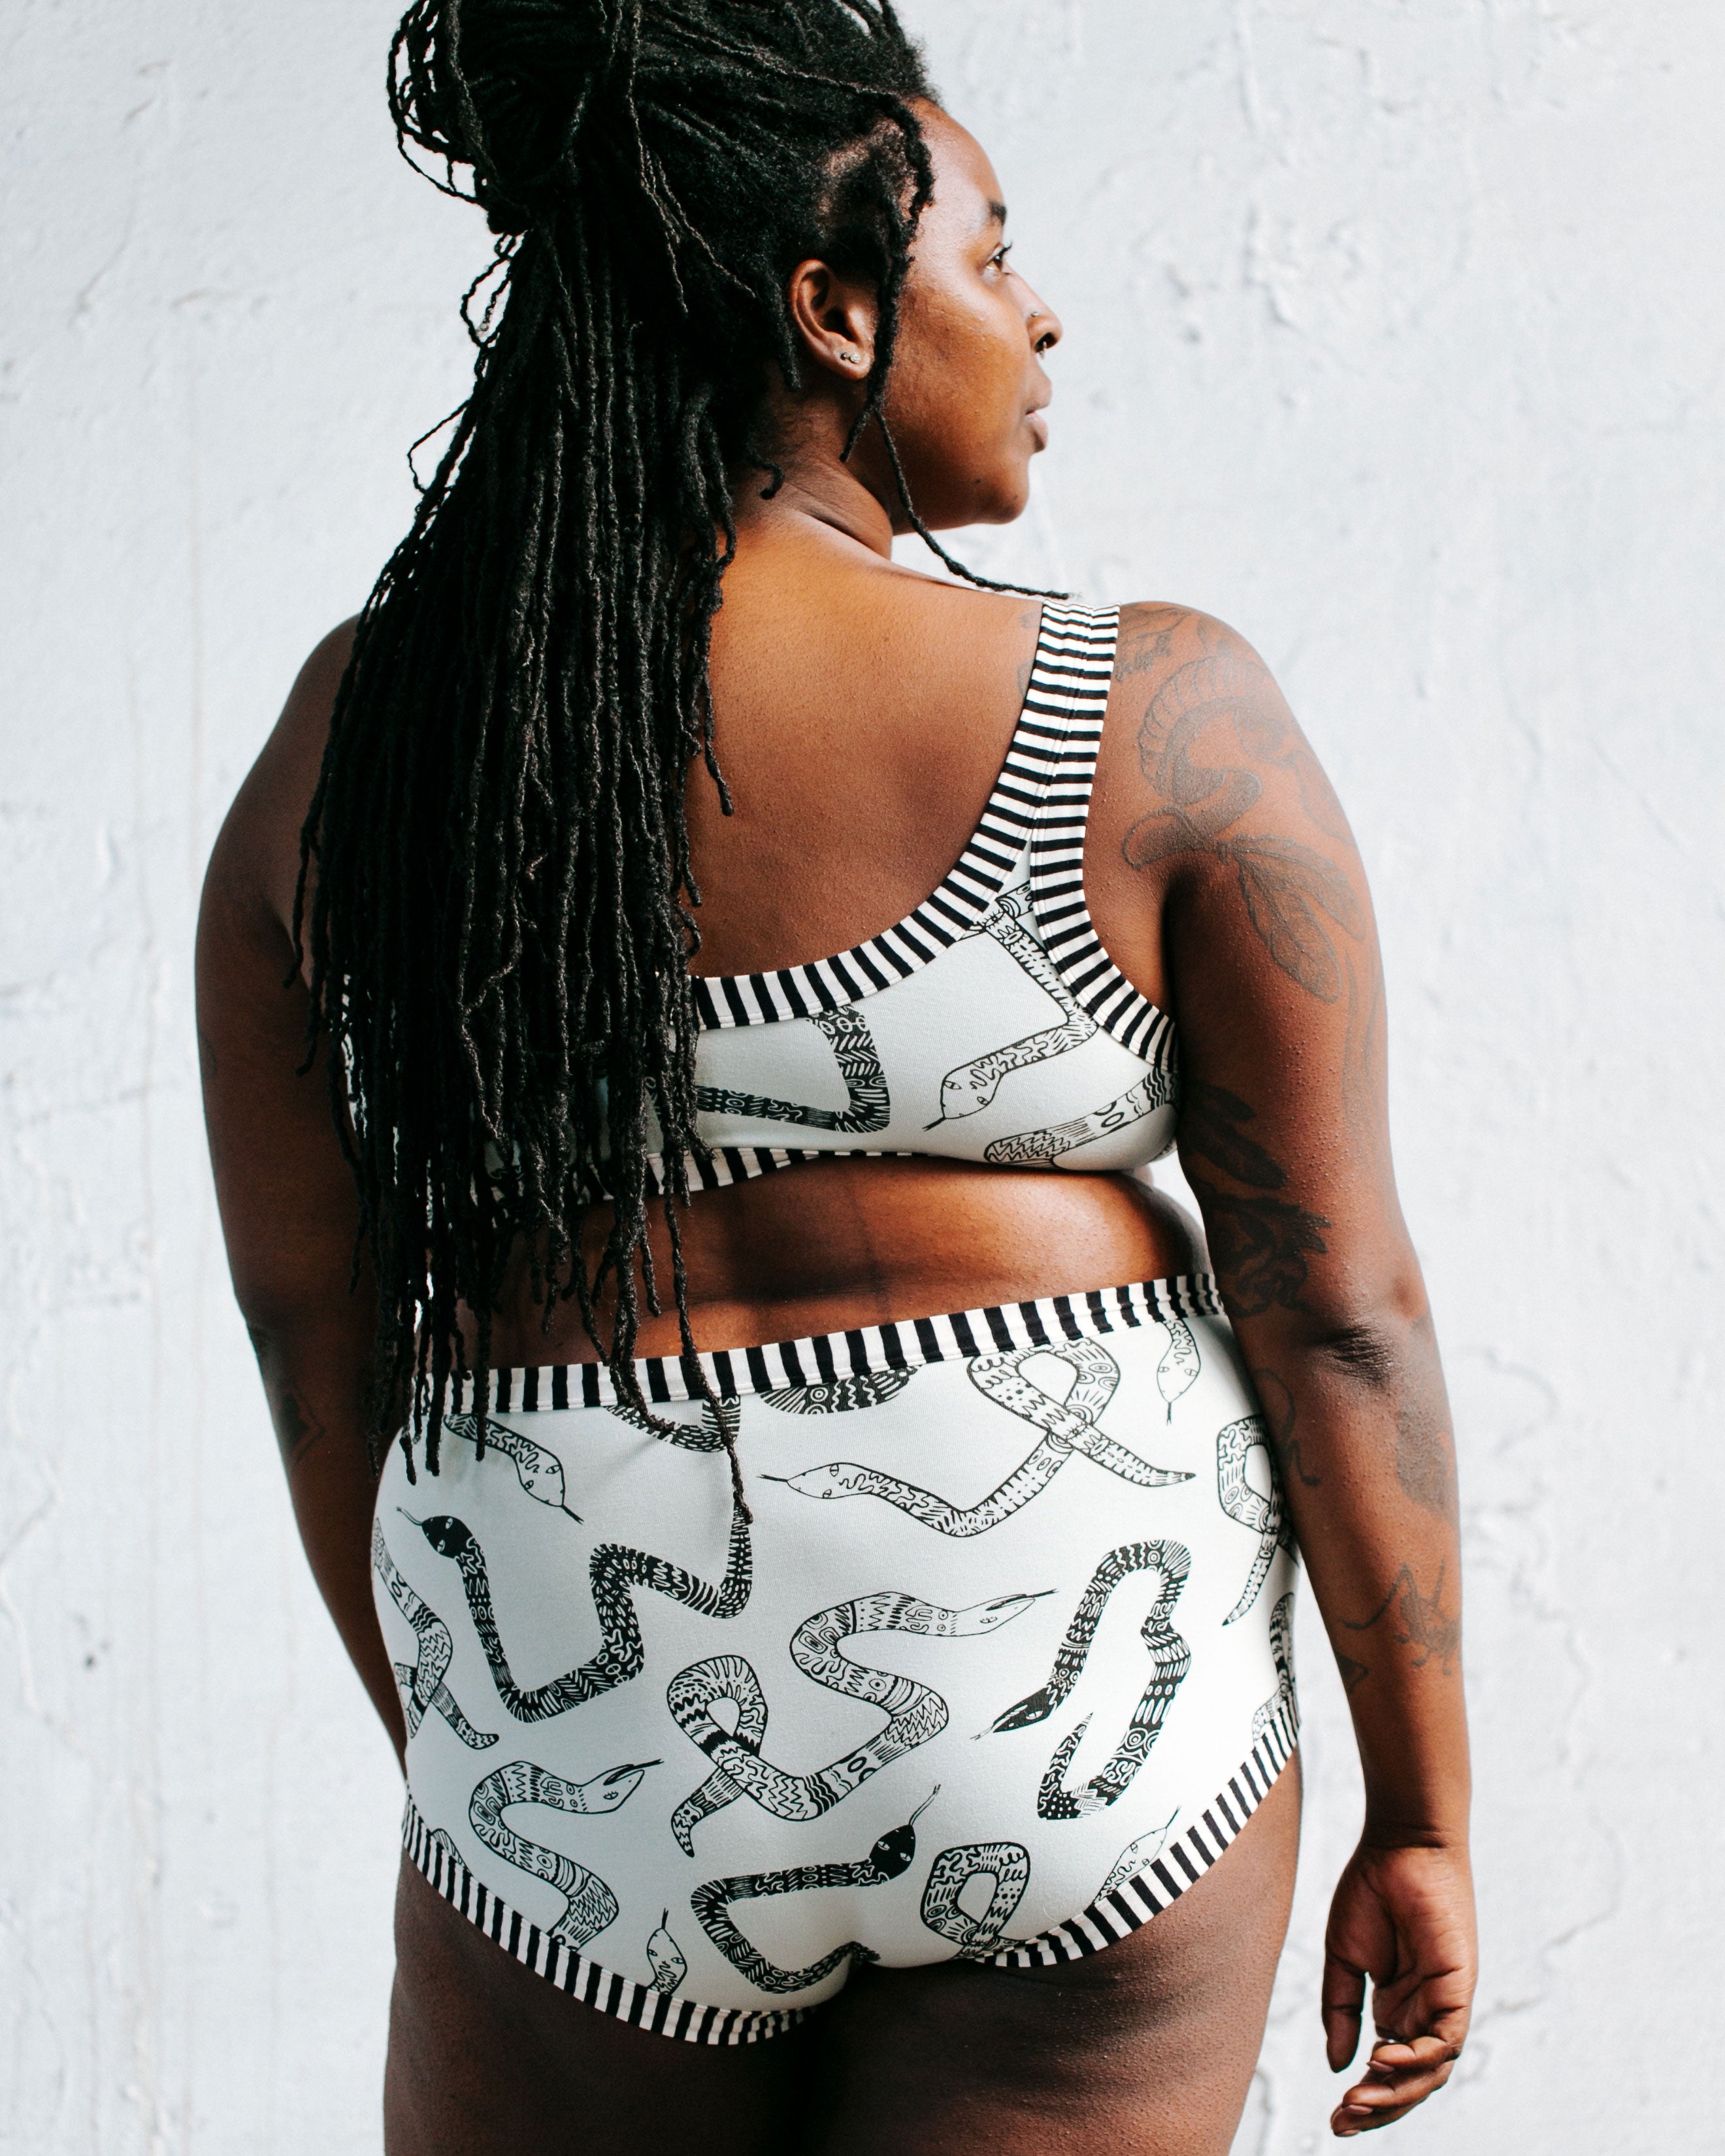 Model standing with her back to us wearing Thunderpants organic cotton Original style underwear and Bralette in our Sketchy Snakes print: sage color with black sketched snakes and black and white stripe binding.